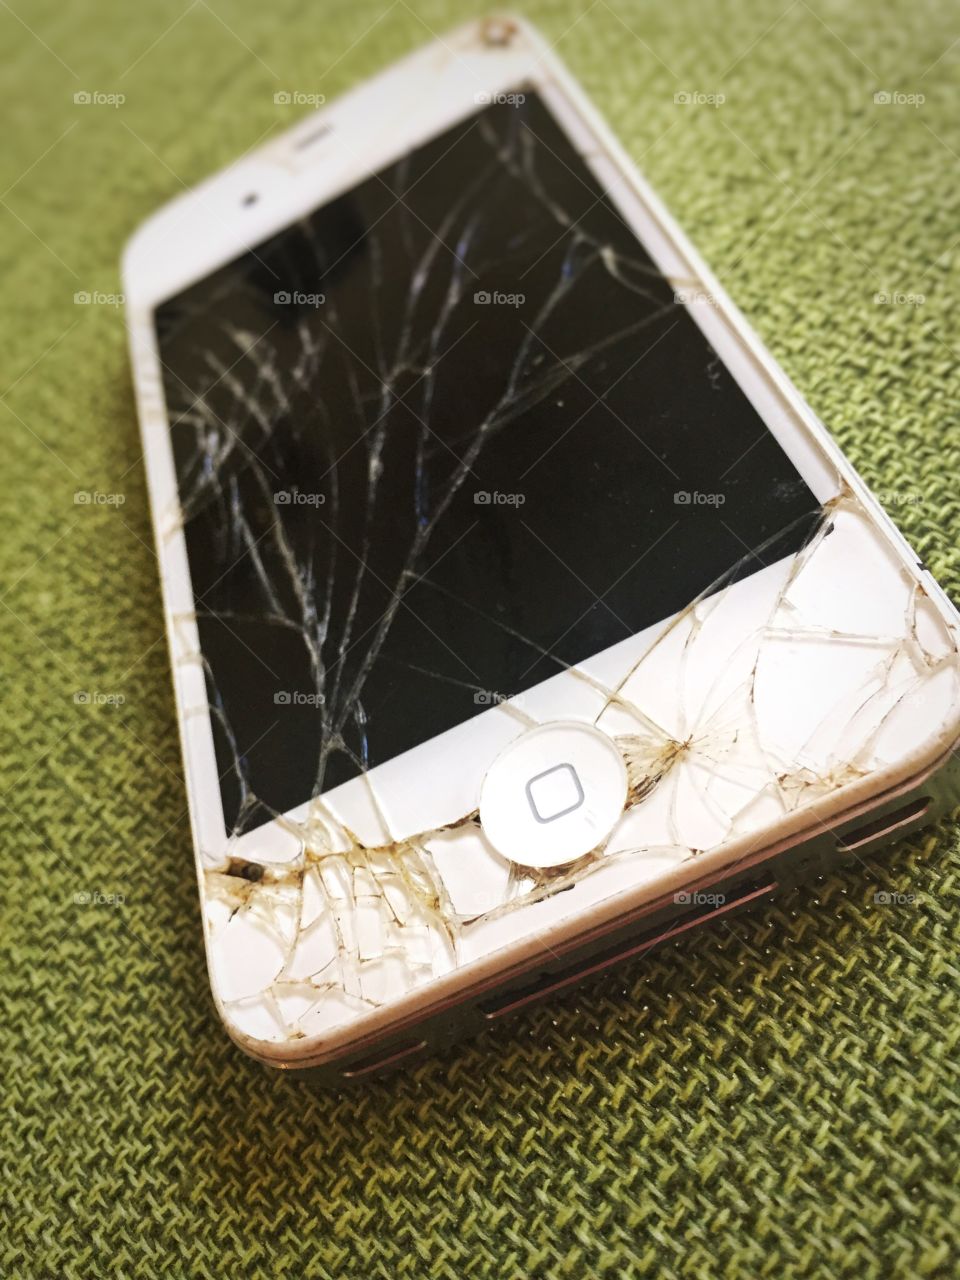 Broken Phone. A smashed iPhone 